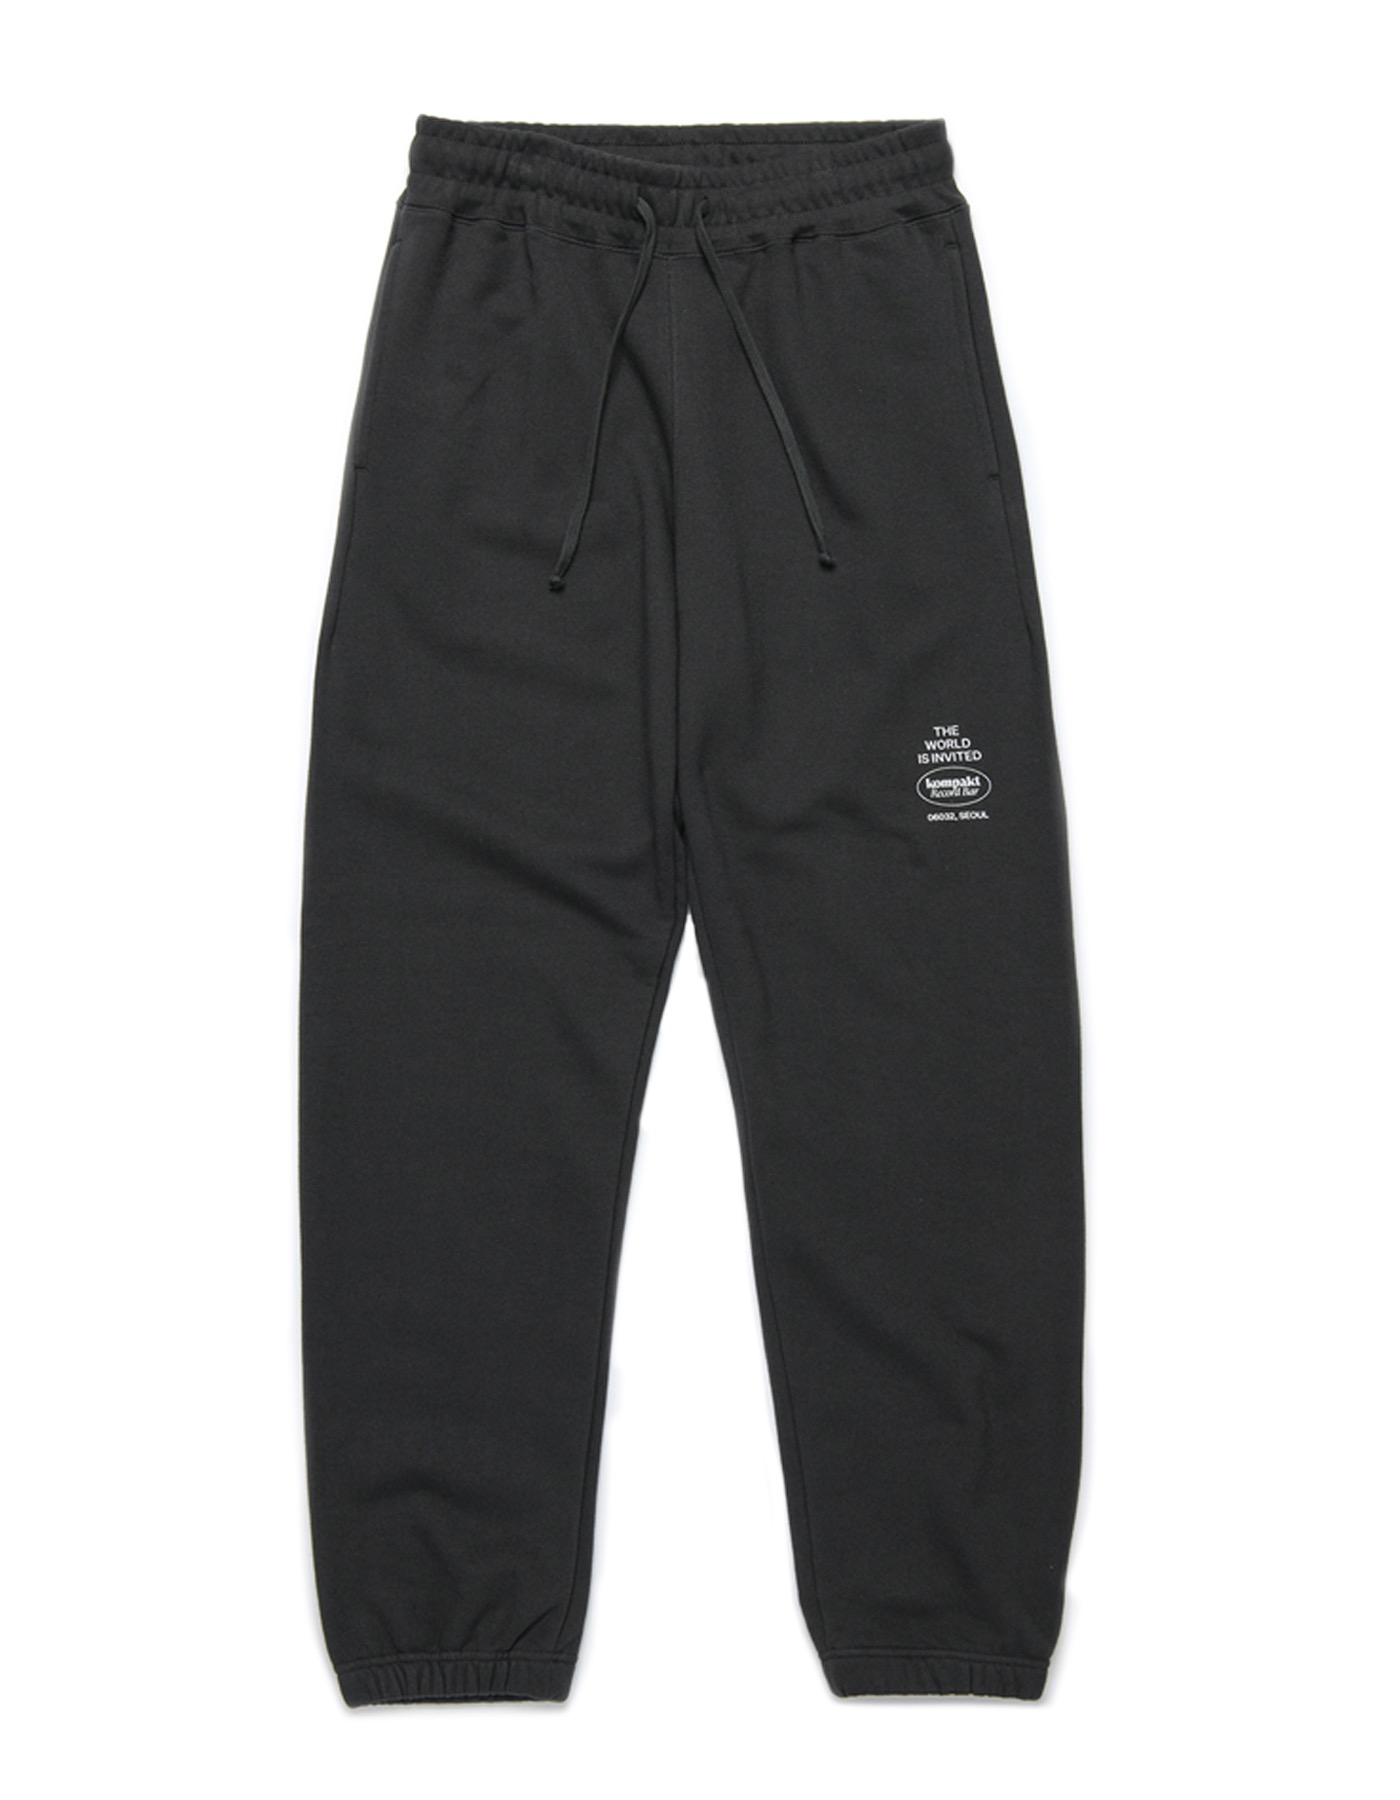 The World is Invited Embroidery Sweatpants - Black